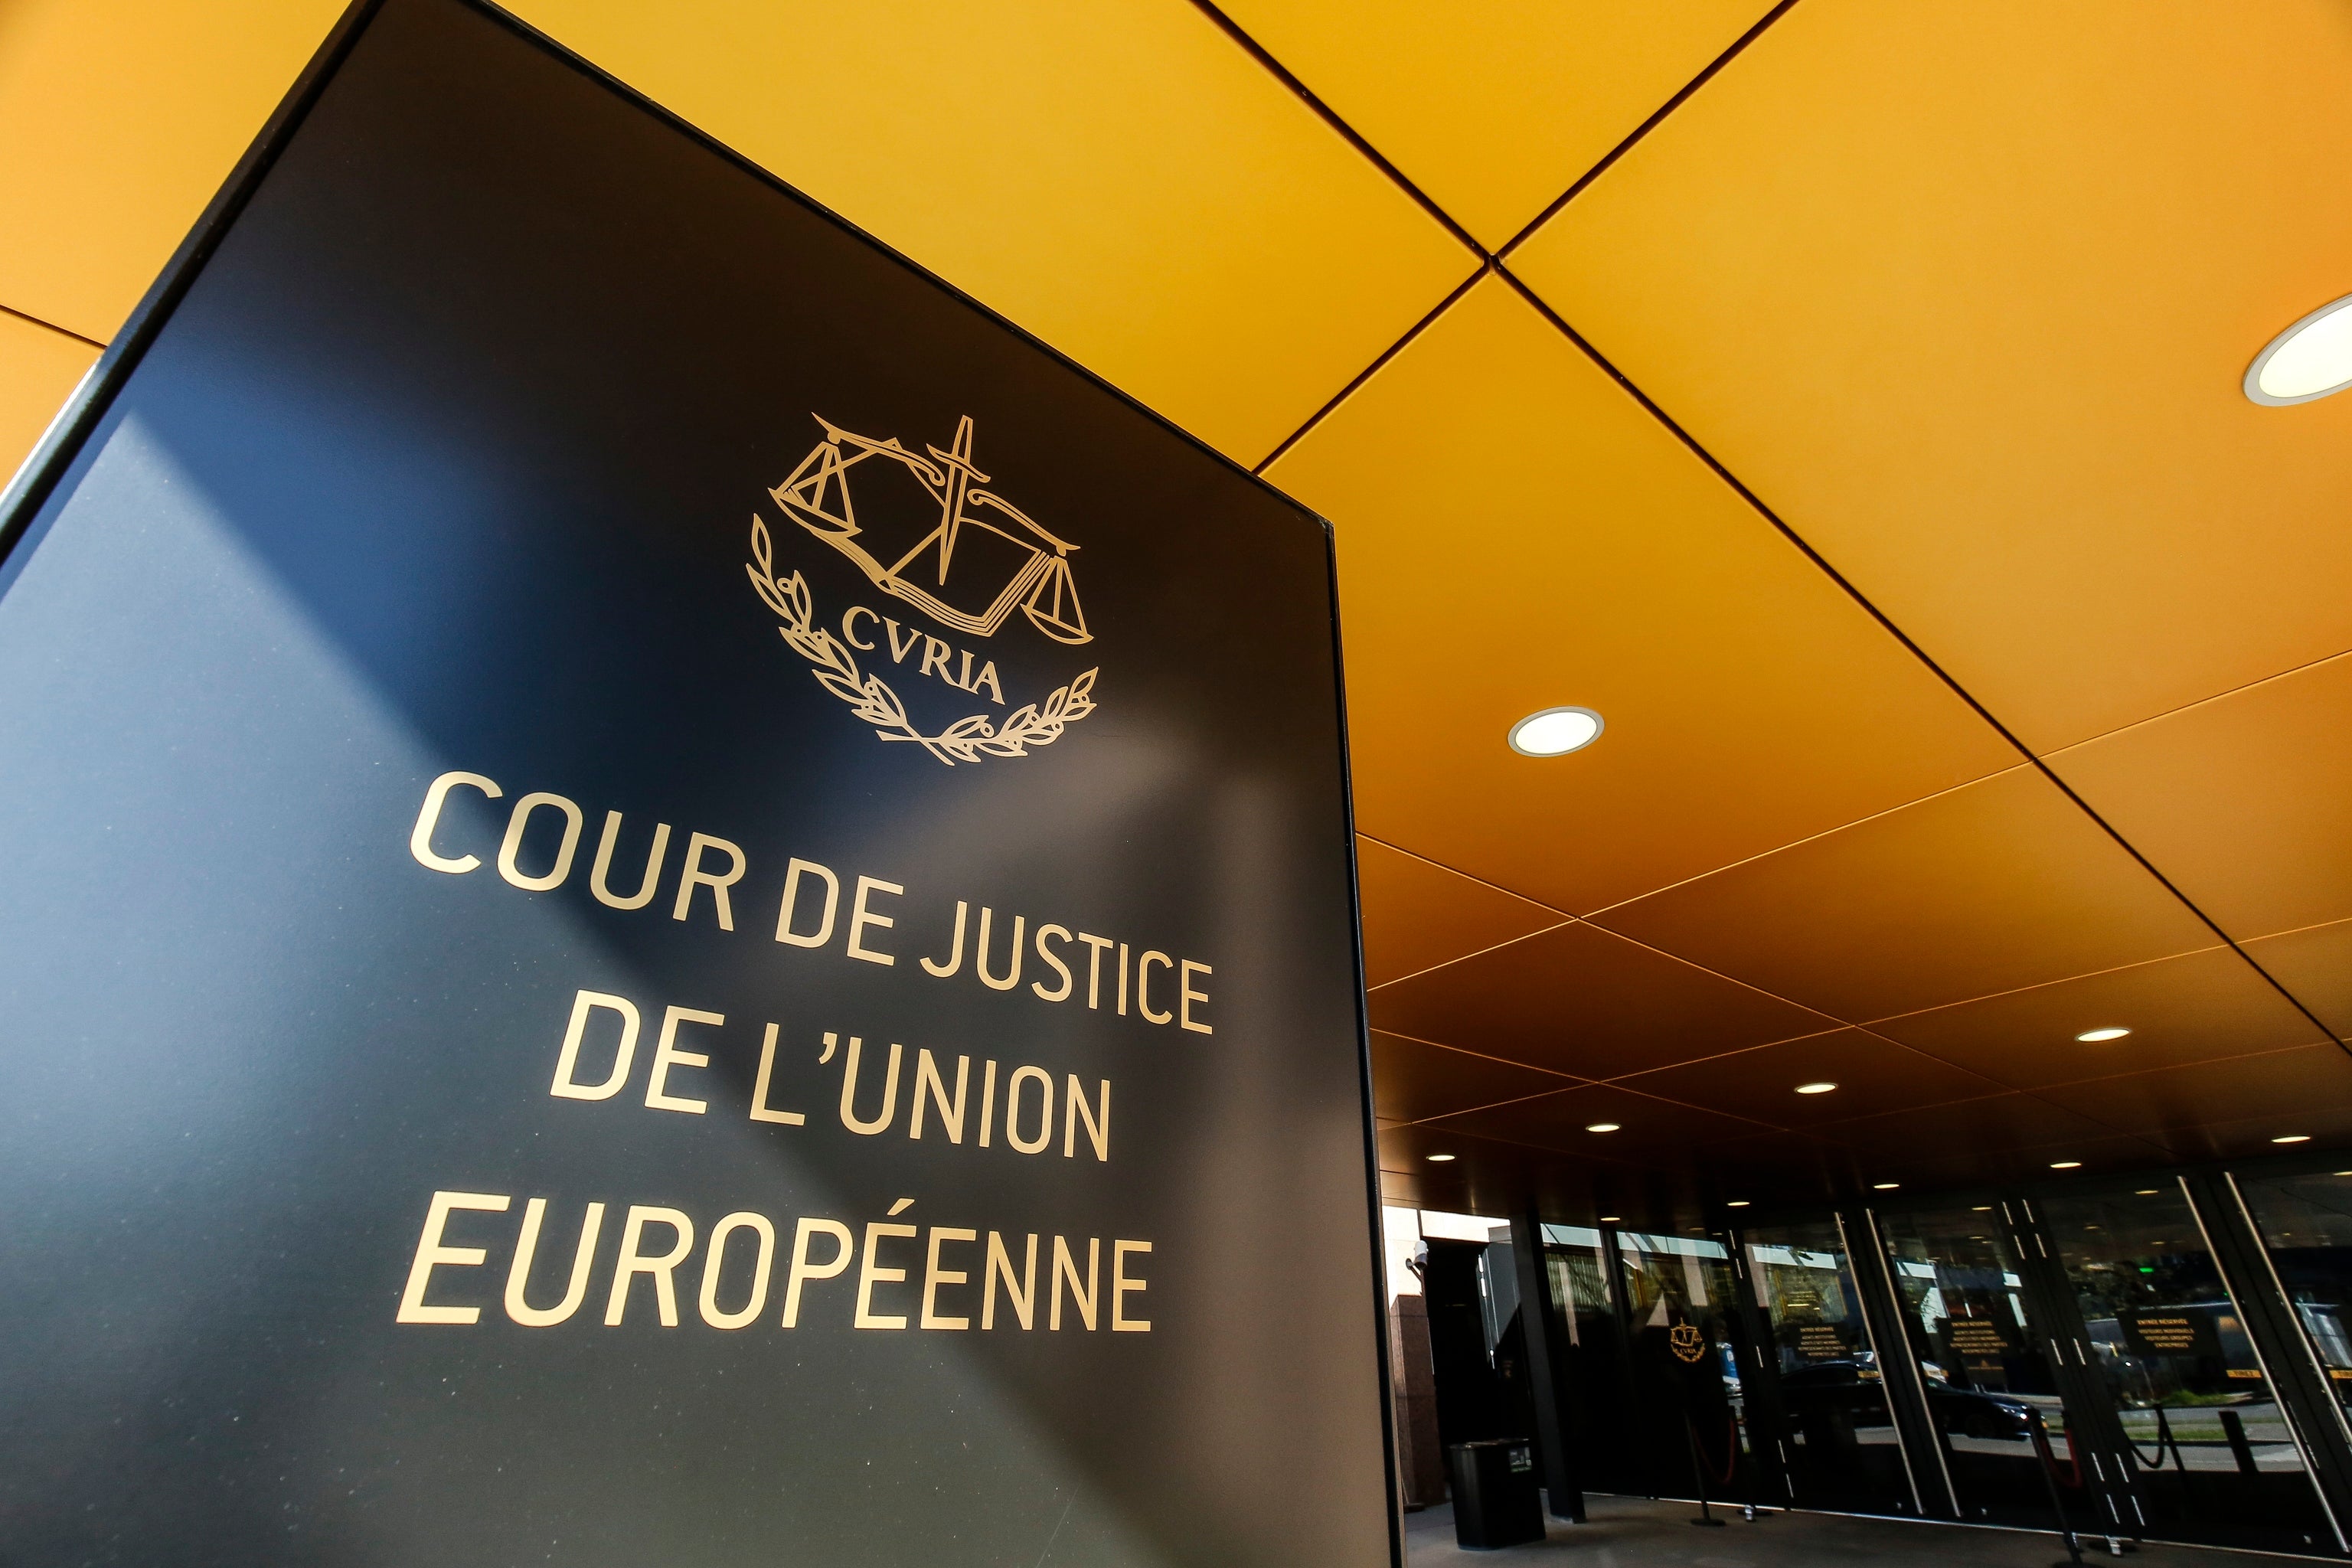 Court of Justice of European Union (CJEU) in Luxembourg